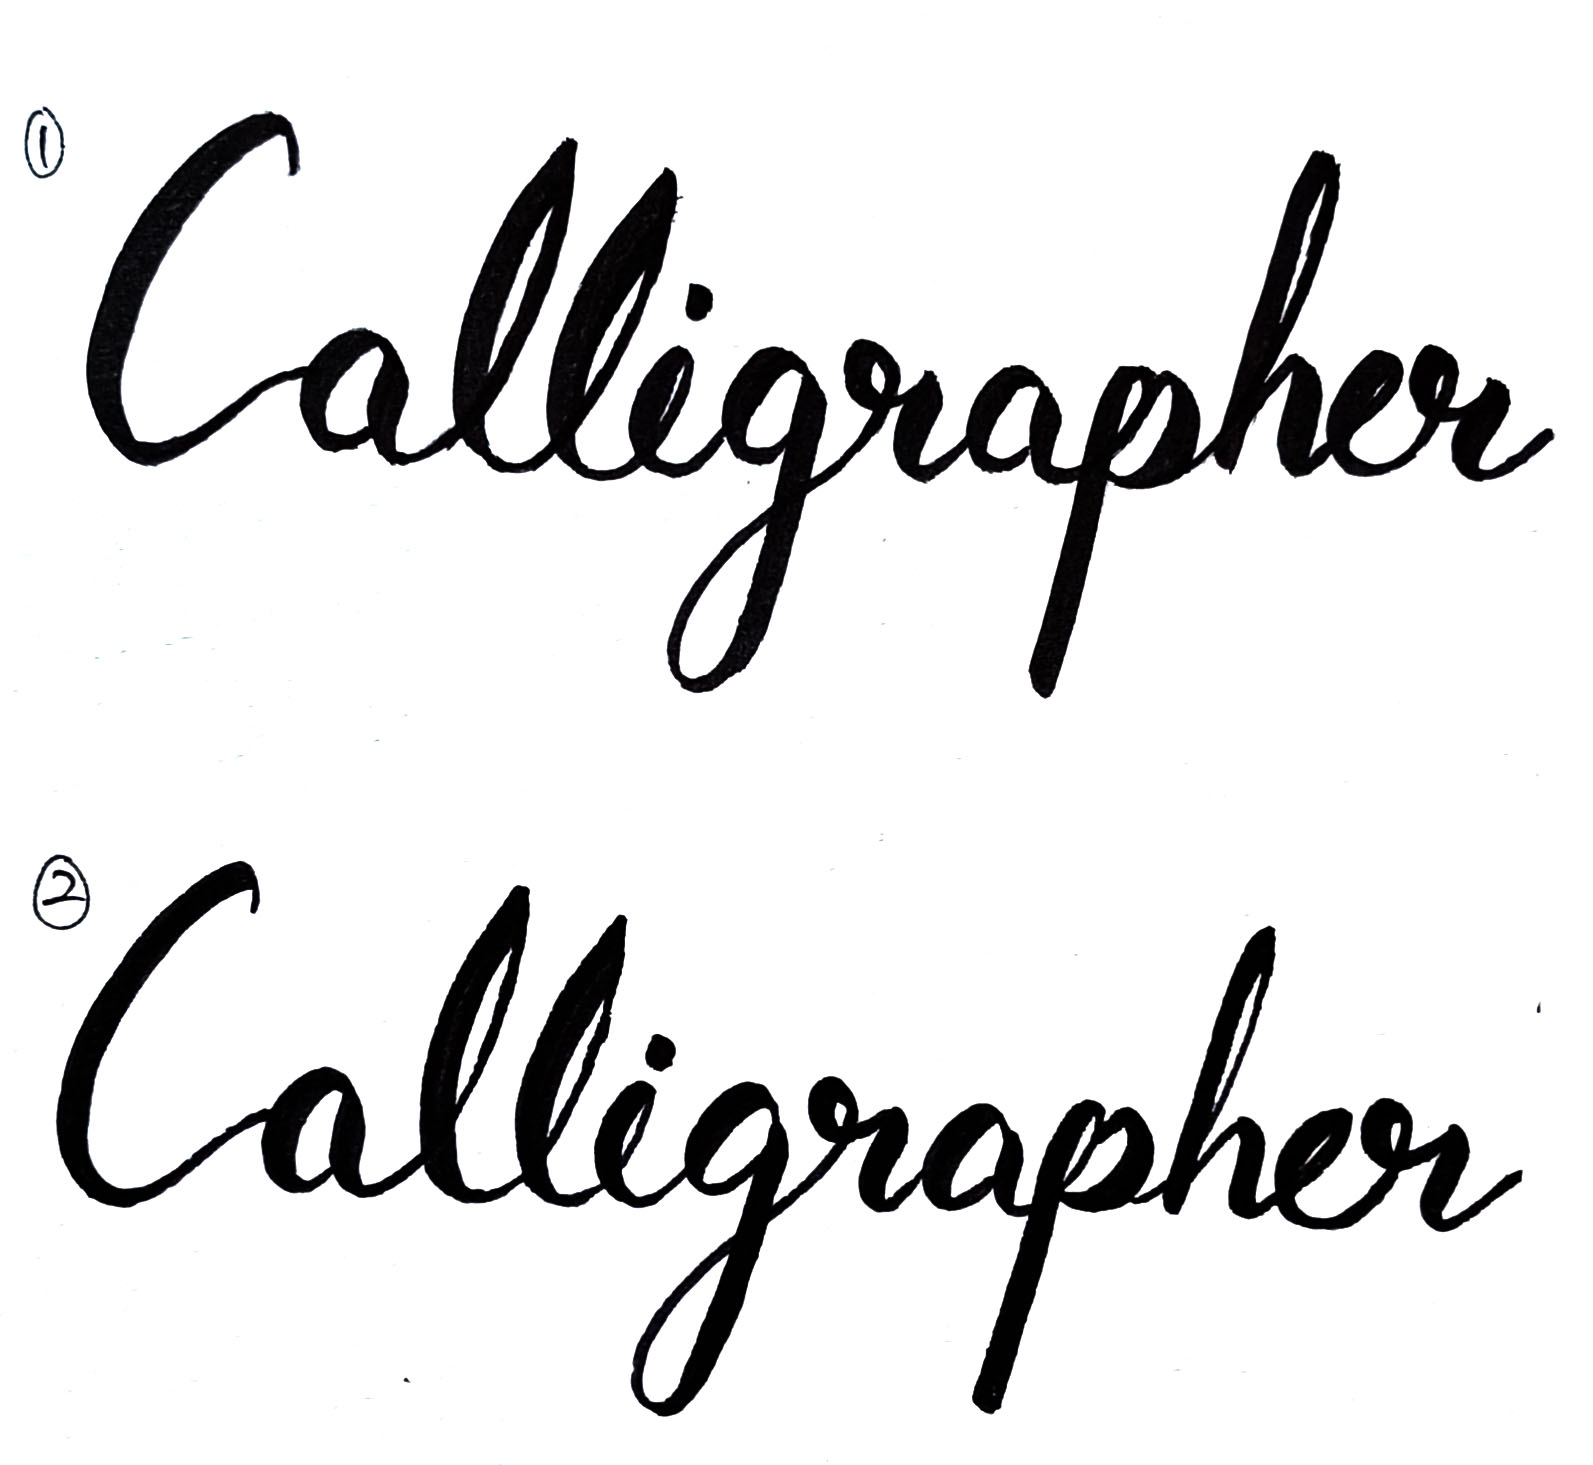 IS HAND LETTERING THE SAME AS CALLIGRAPHY?